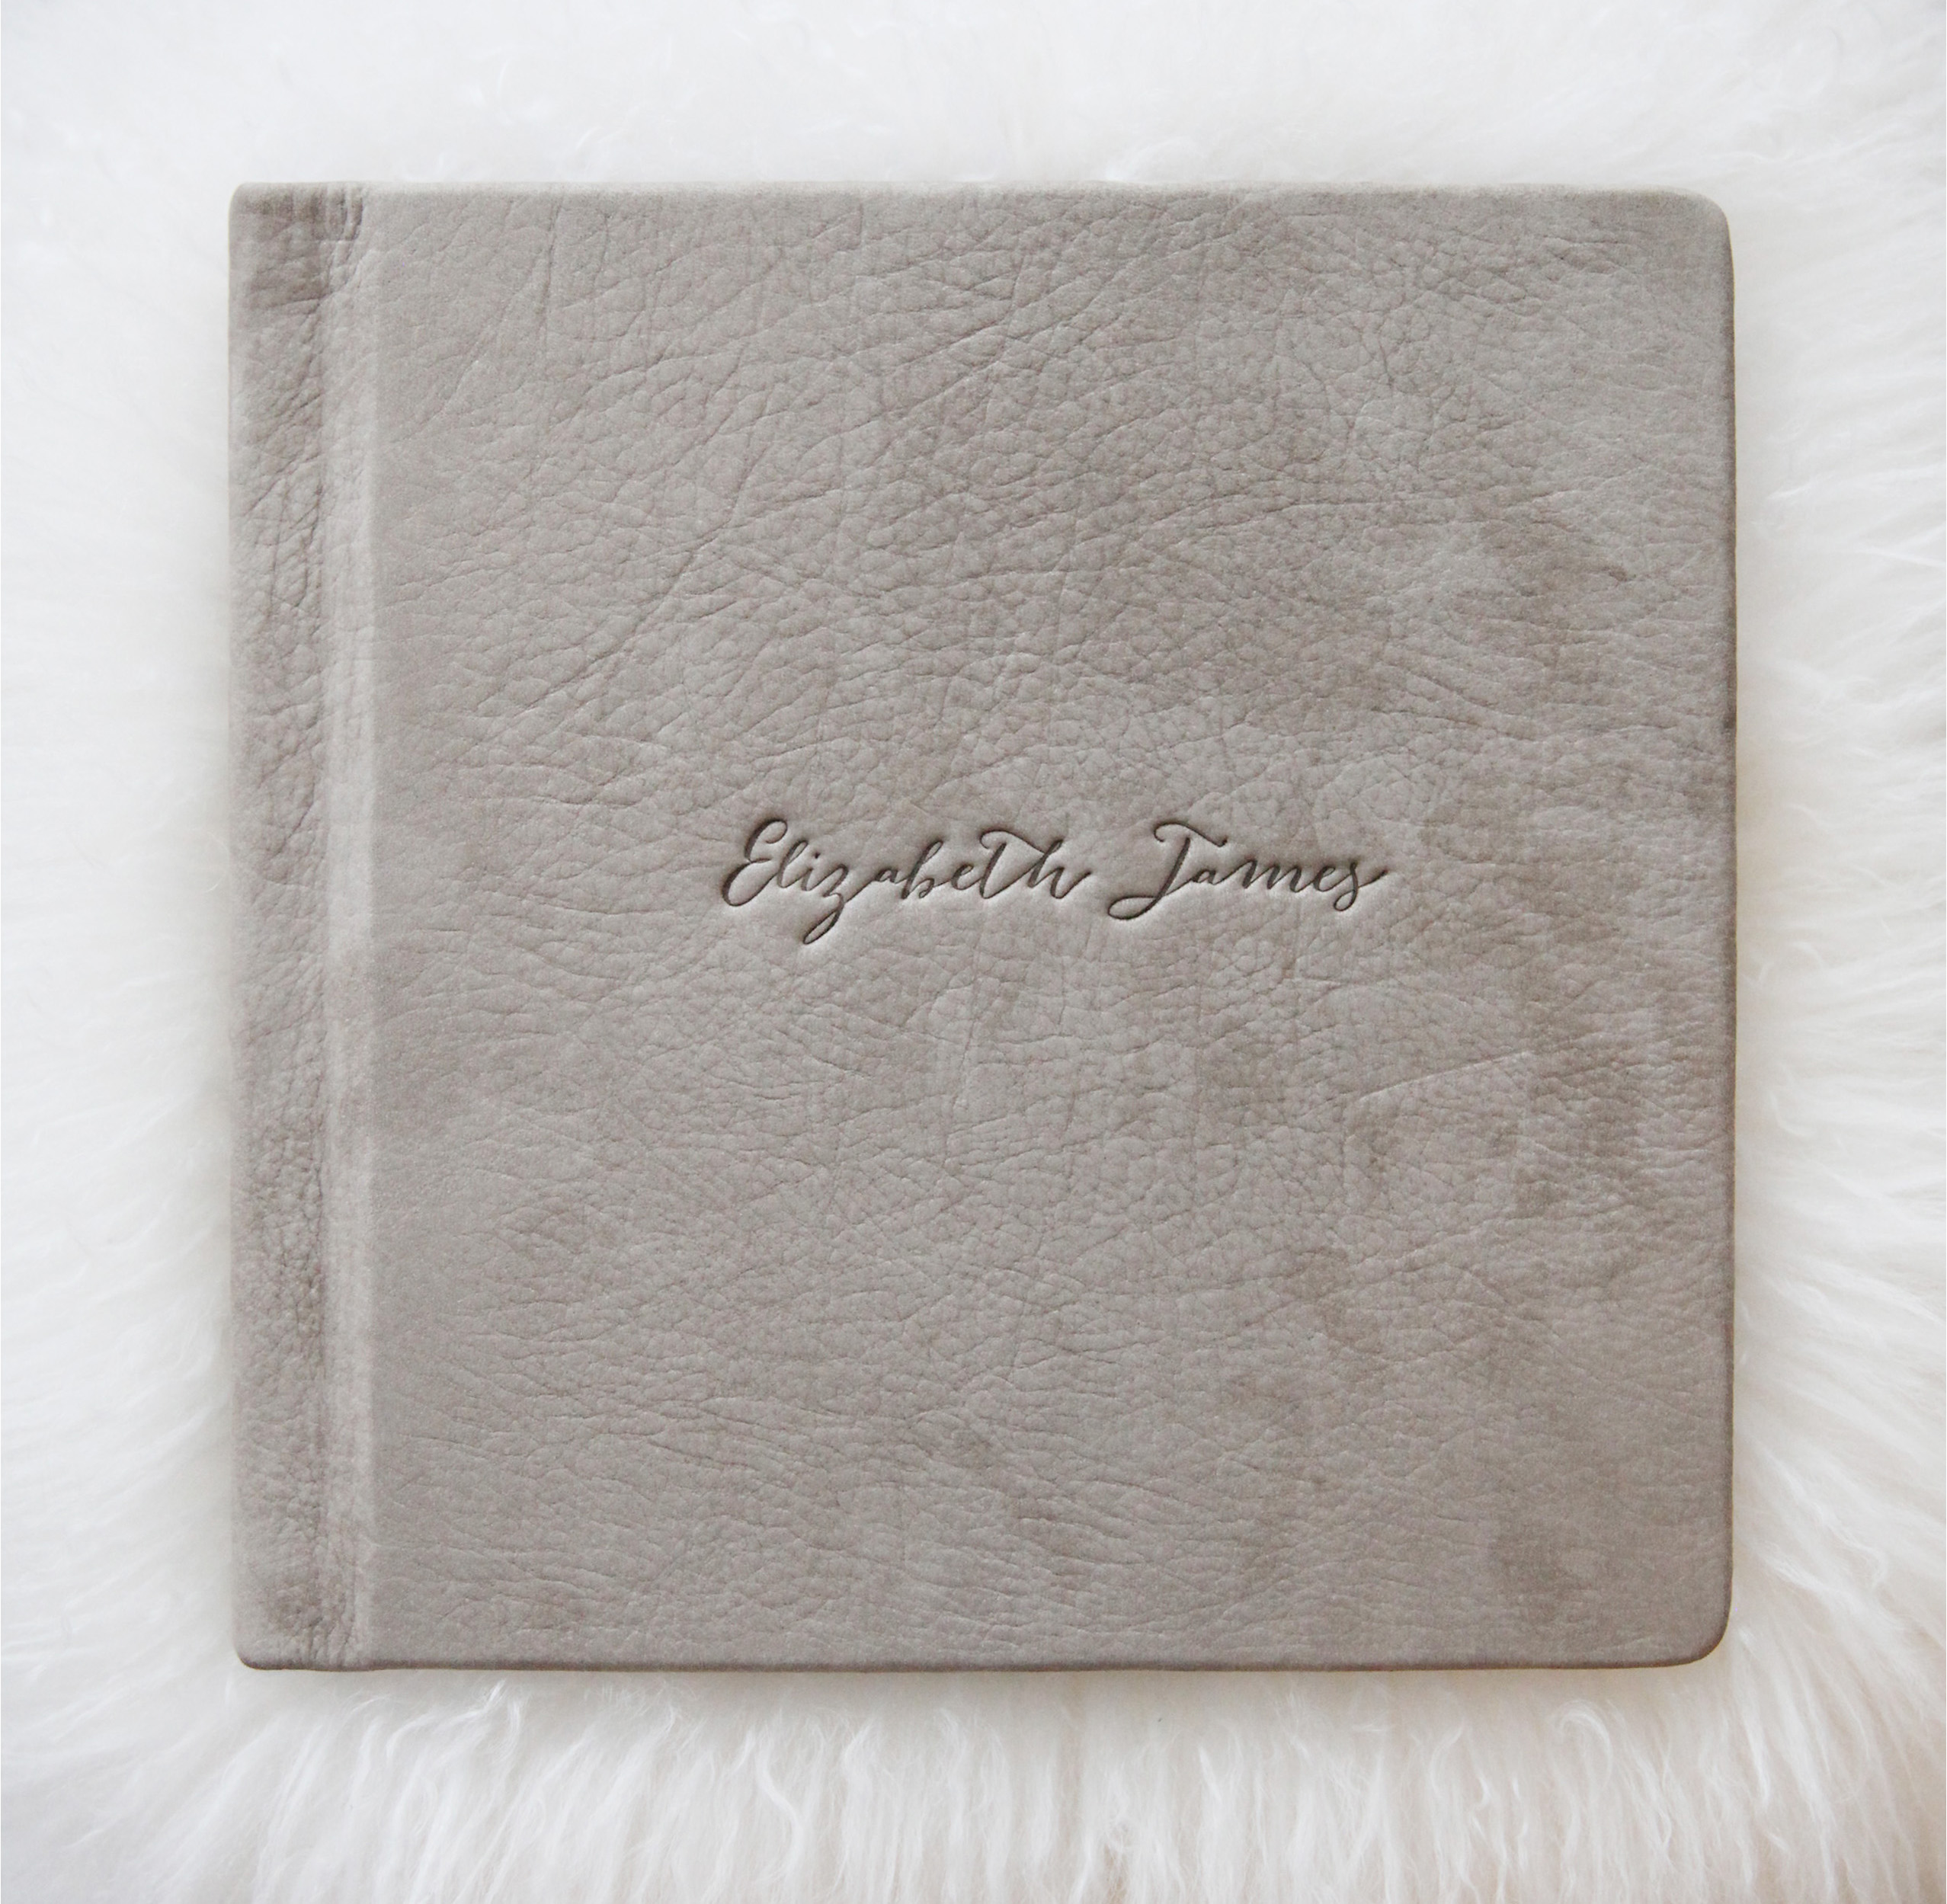 Best Charlotte, NC Custom Leather Photo Albums For Professional Photographers